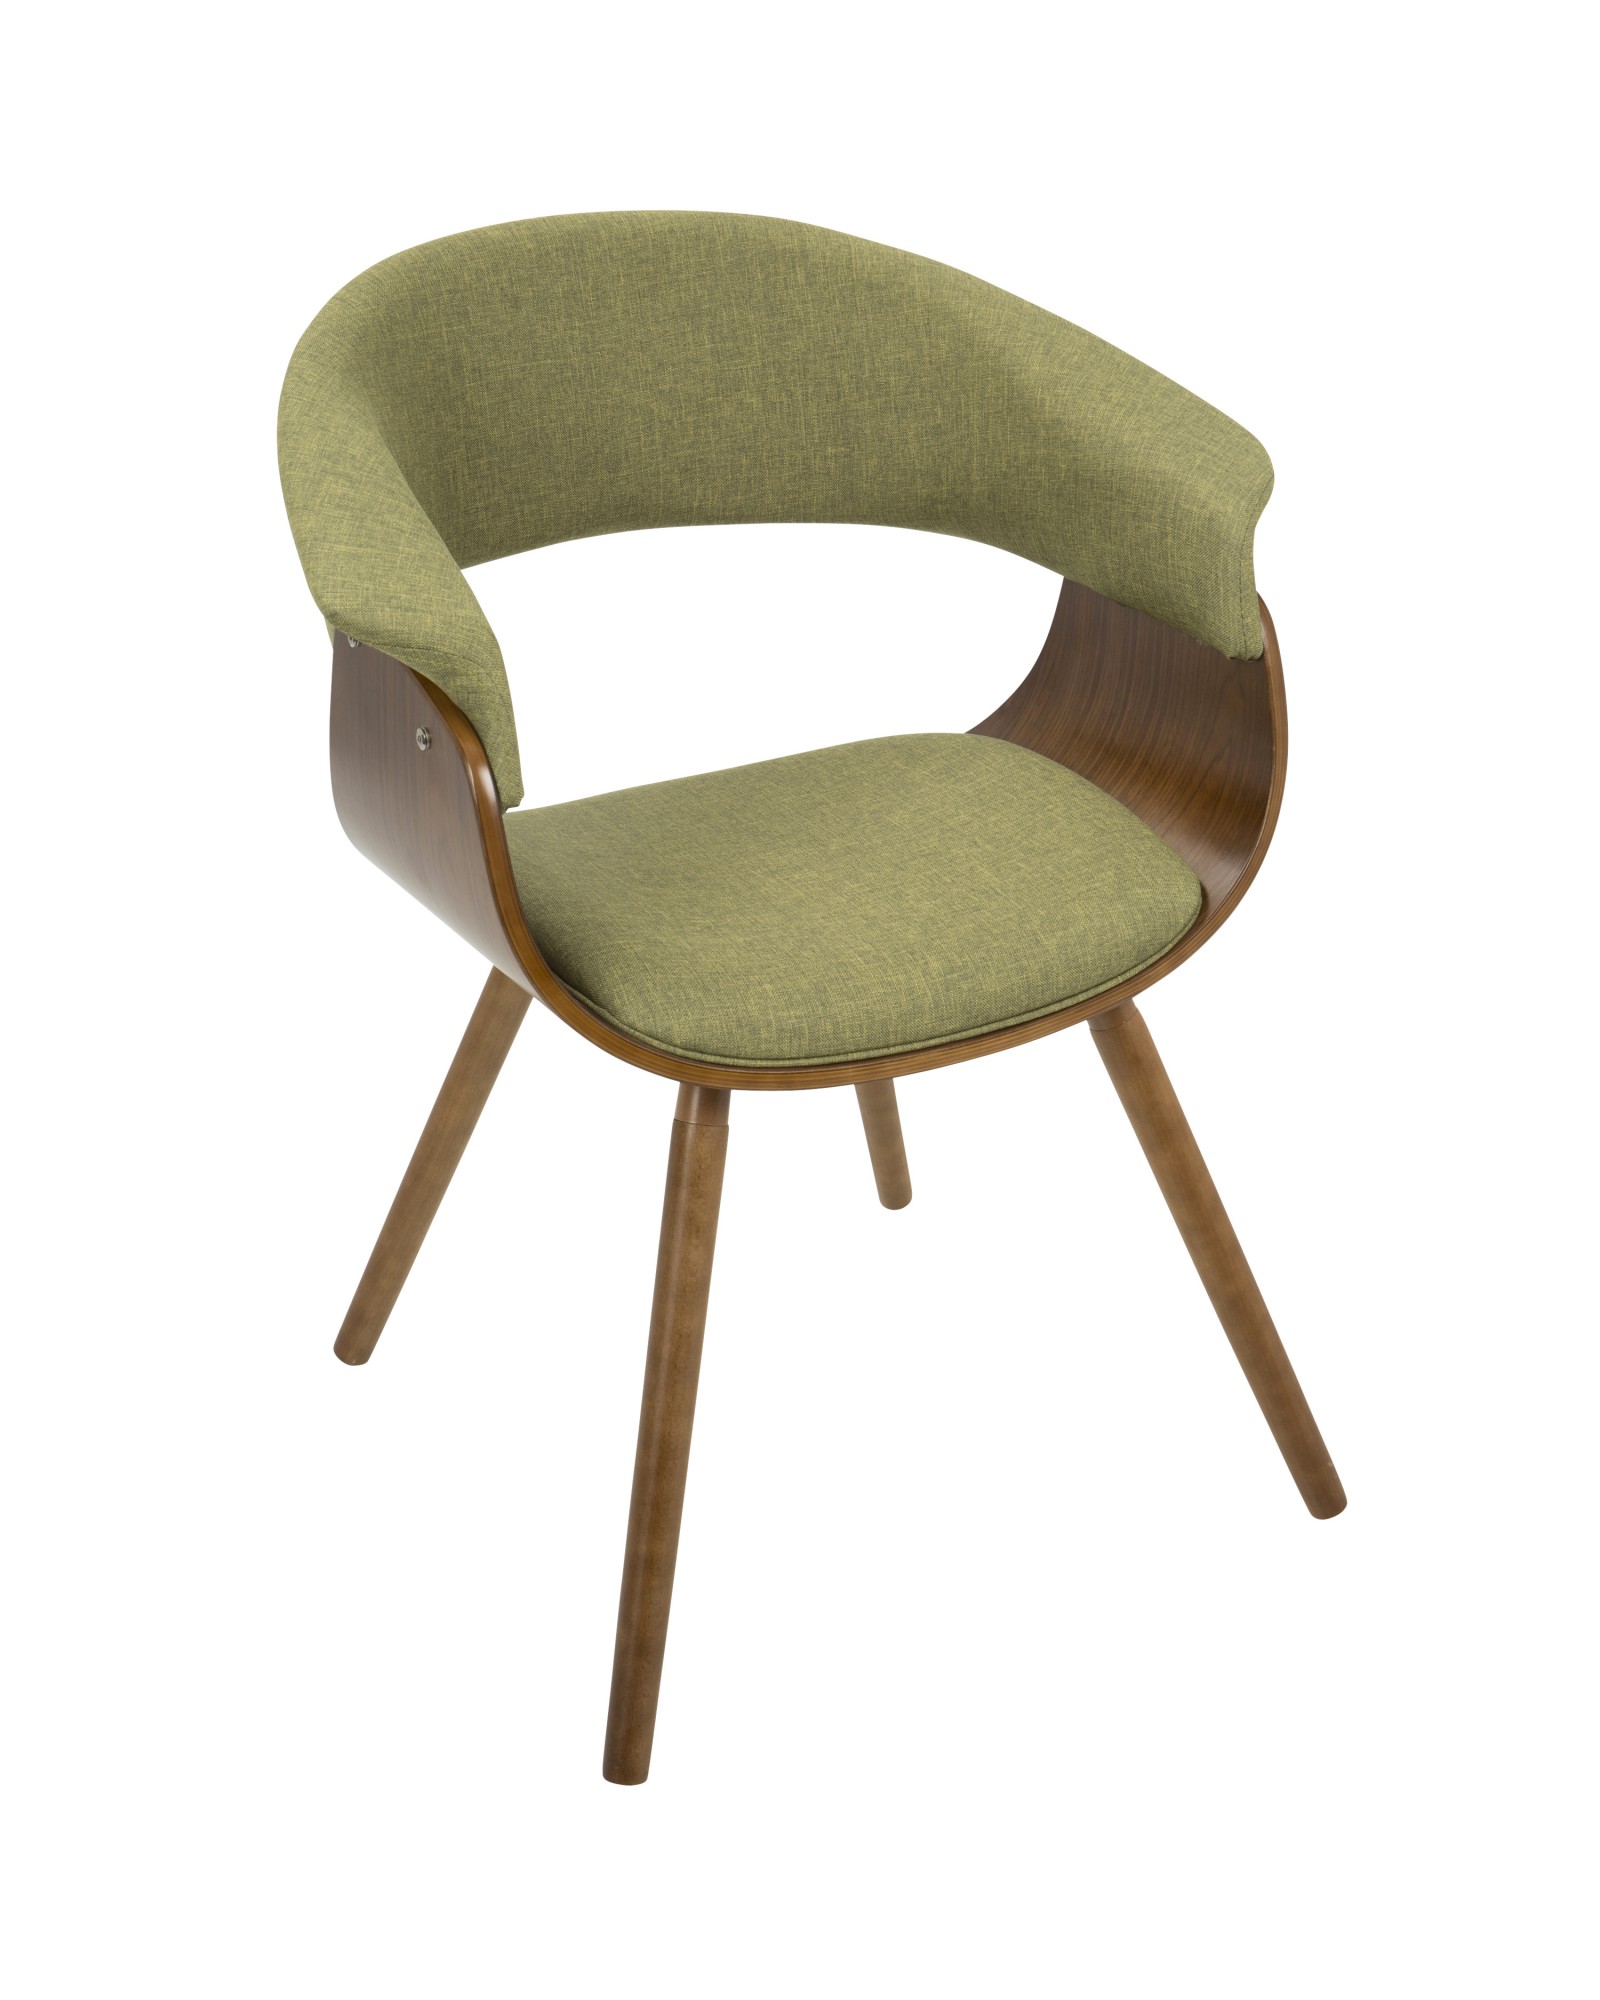 Vintage Mod Mid-Century Modern Chair in Walnut and Green Fabric